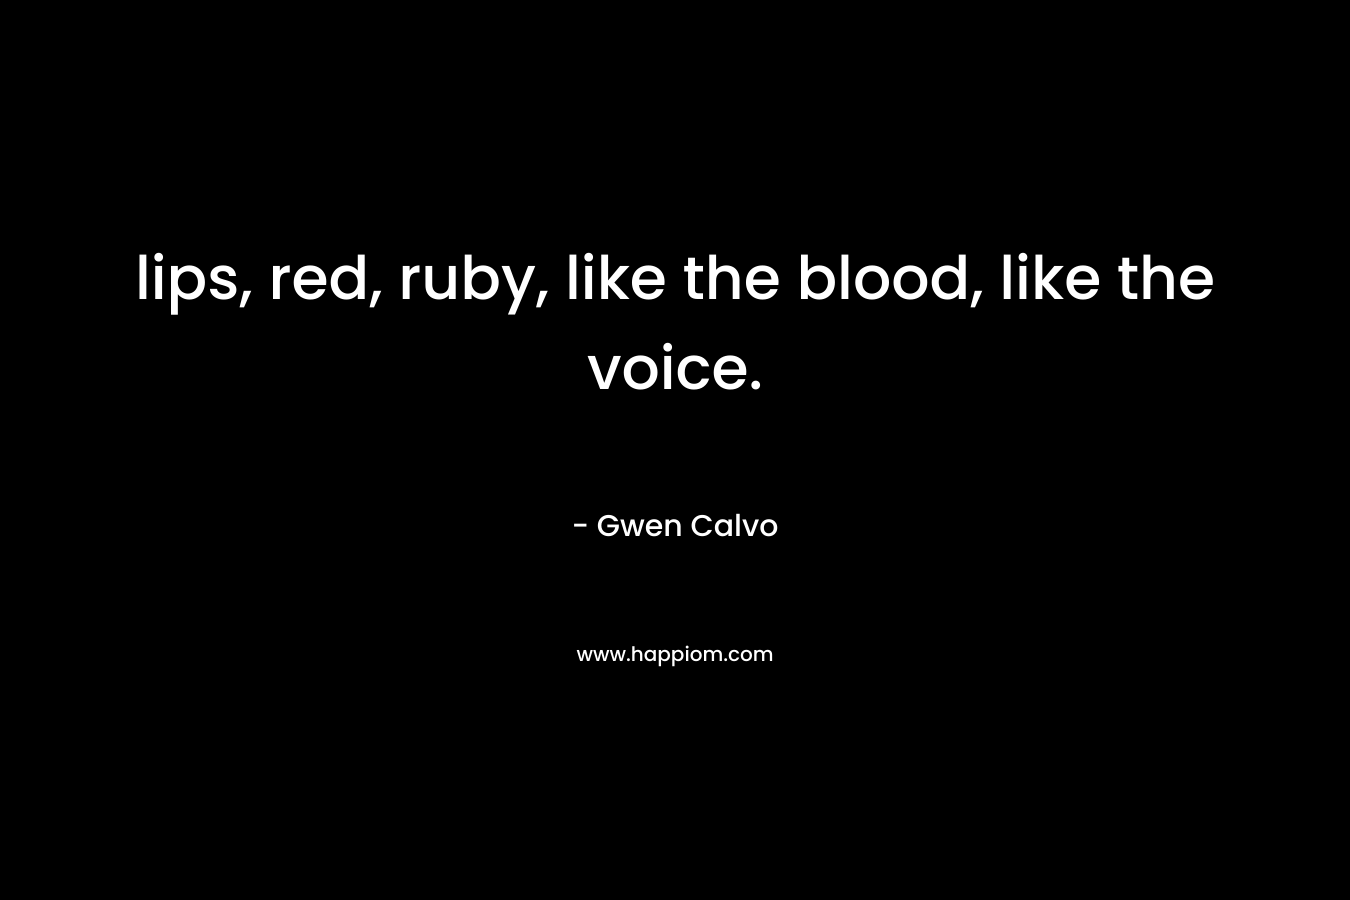 lips, red, ruby, like the blood, like the voice.